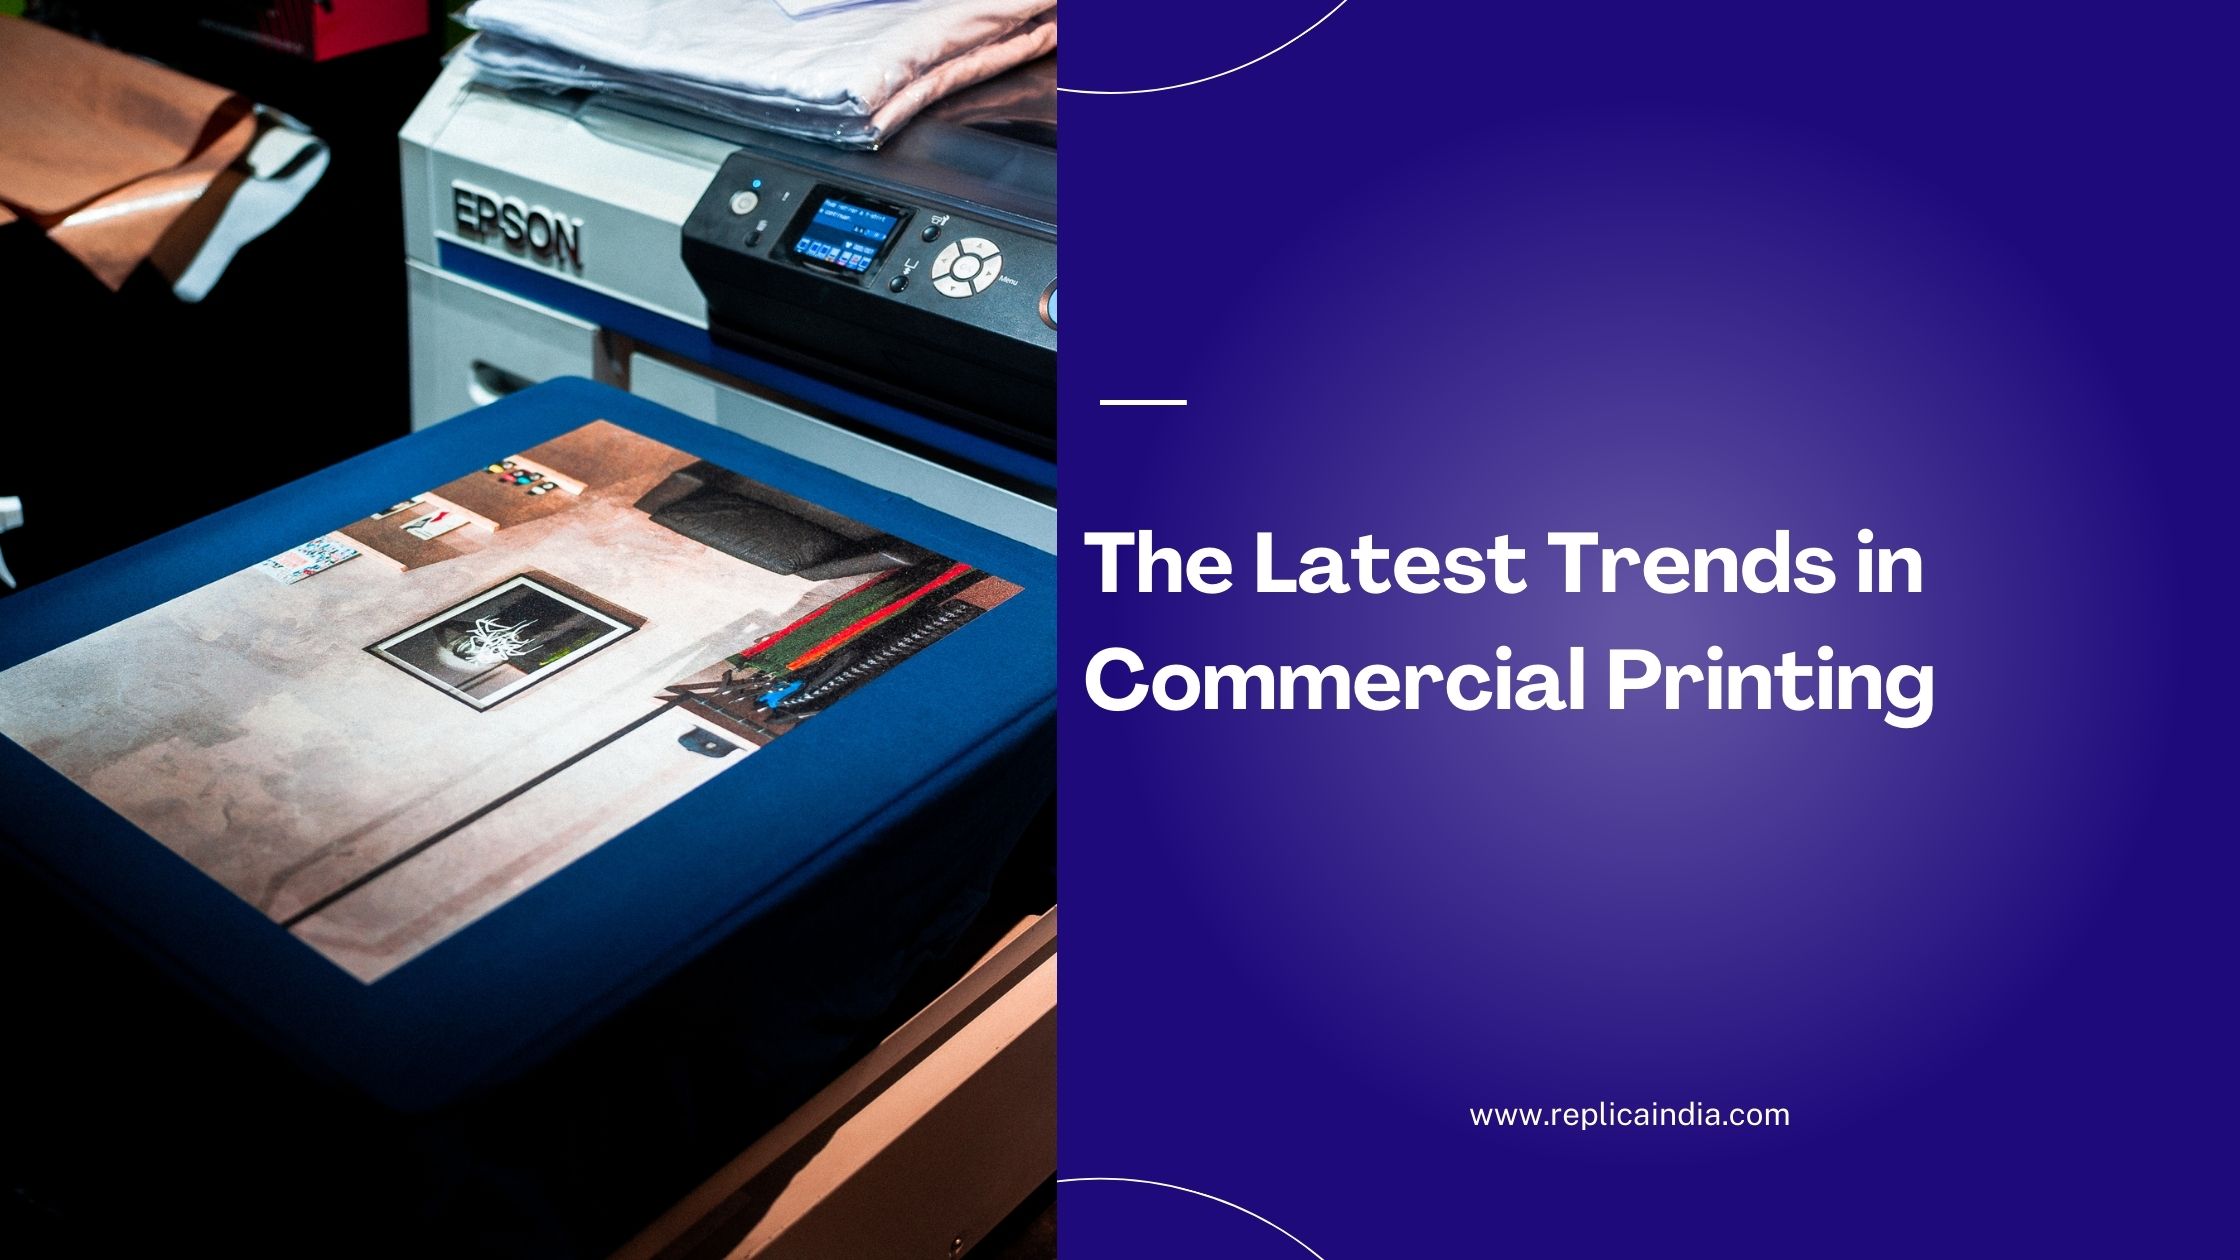 The Latest Trends in Commercial Printing